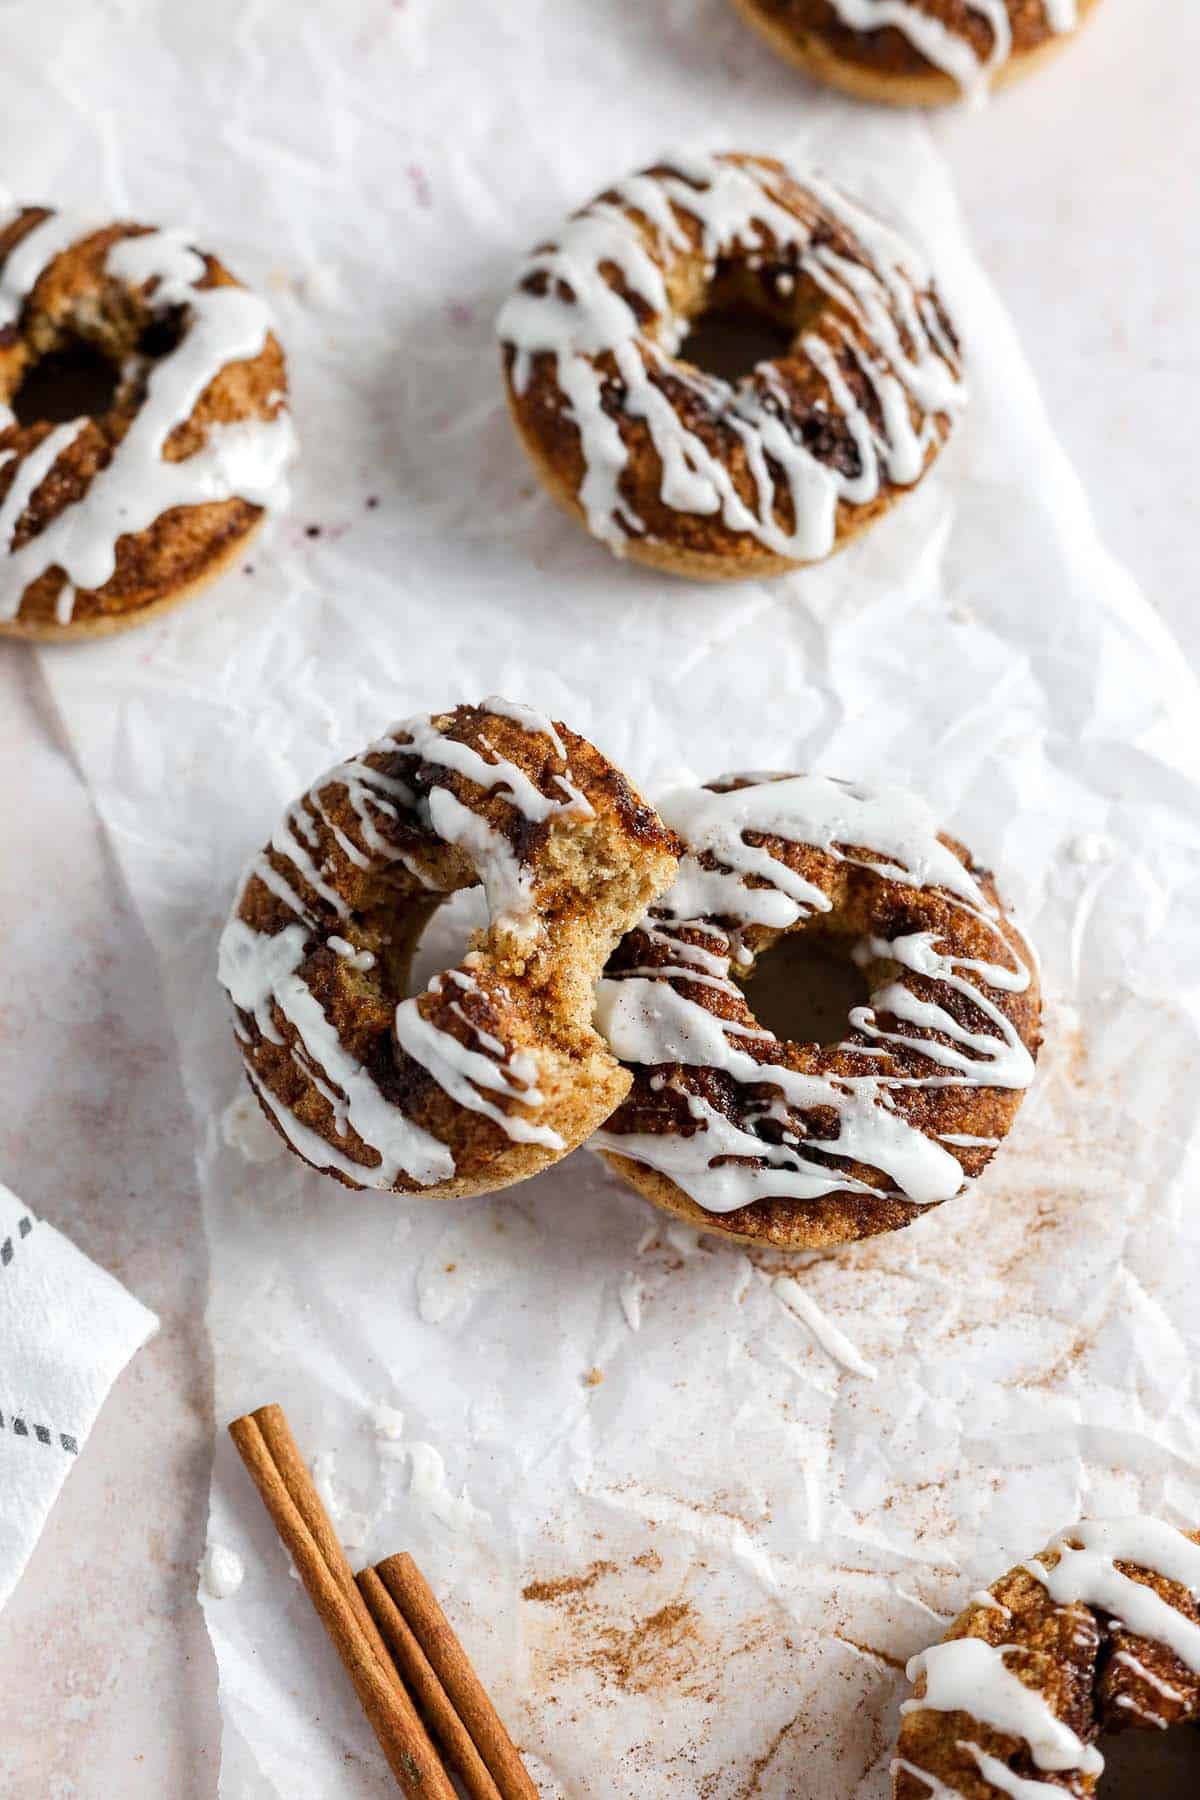 Cinnamon roll baked donut recipe on a crinkled wax paper.